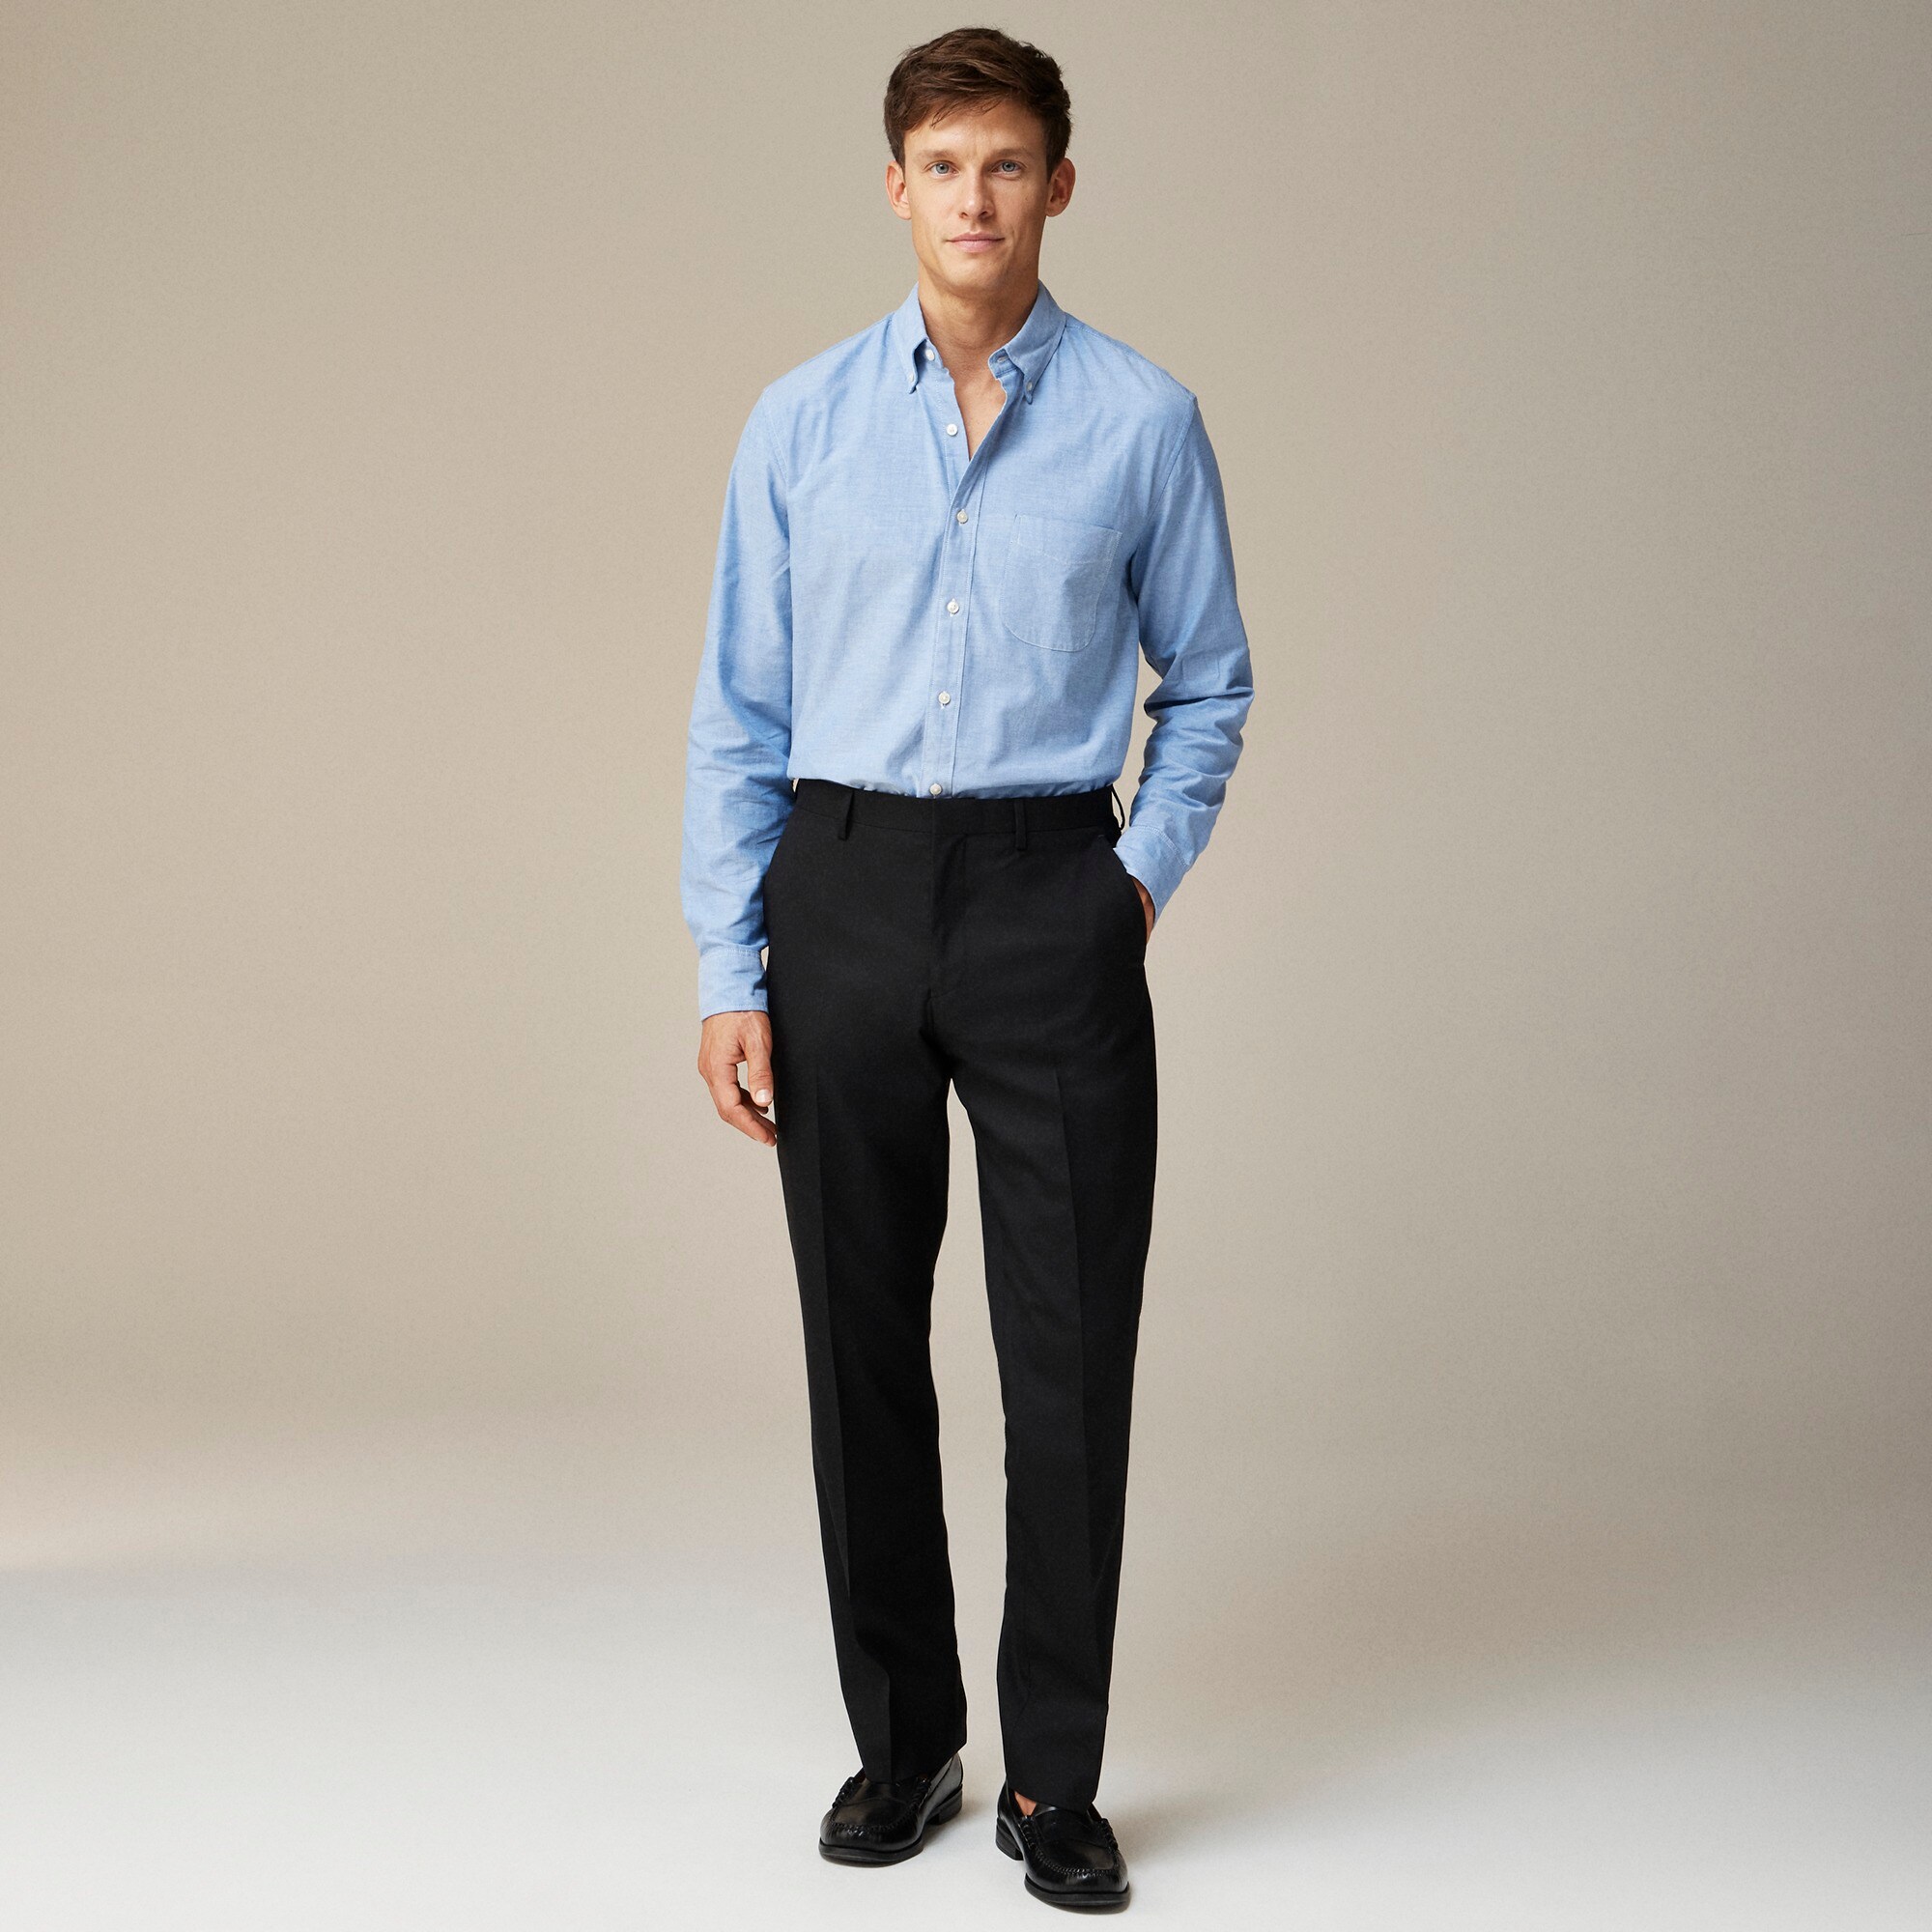  Crosby Classic-fit suit pant in Italian wool